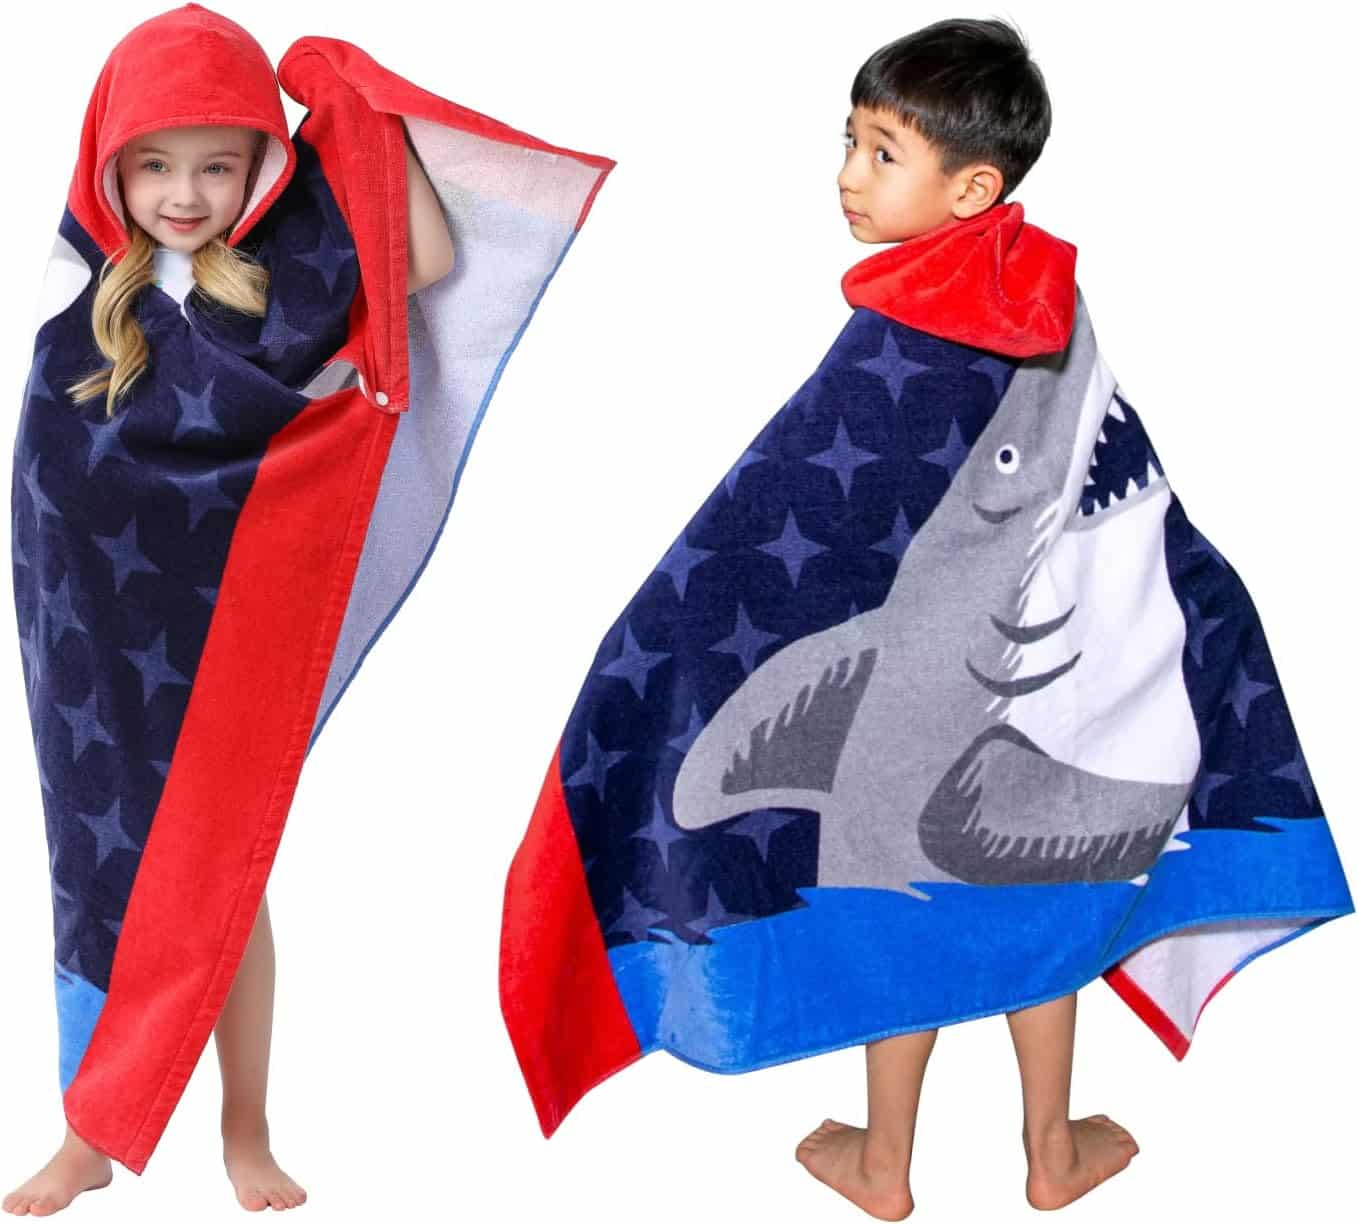 Athaelay Premium Cotton Hooded Towel for Kids | Great White Shark Design | Product Review